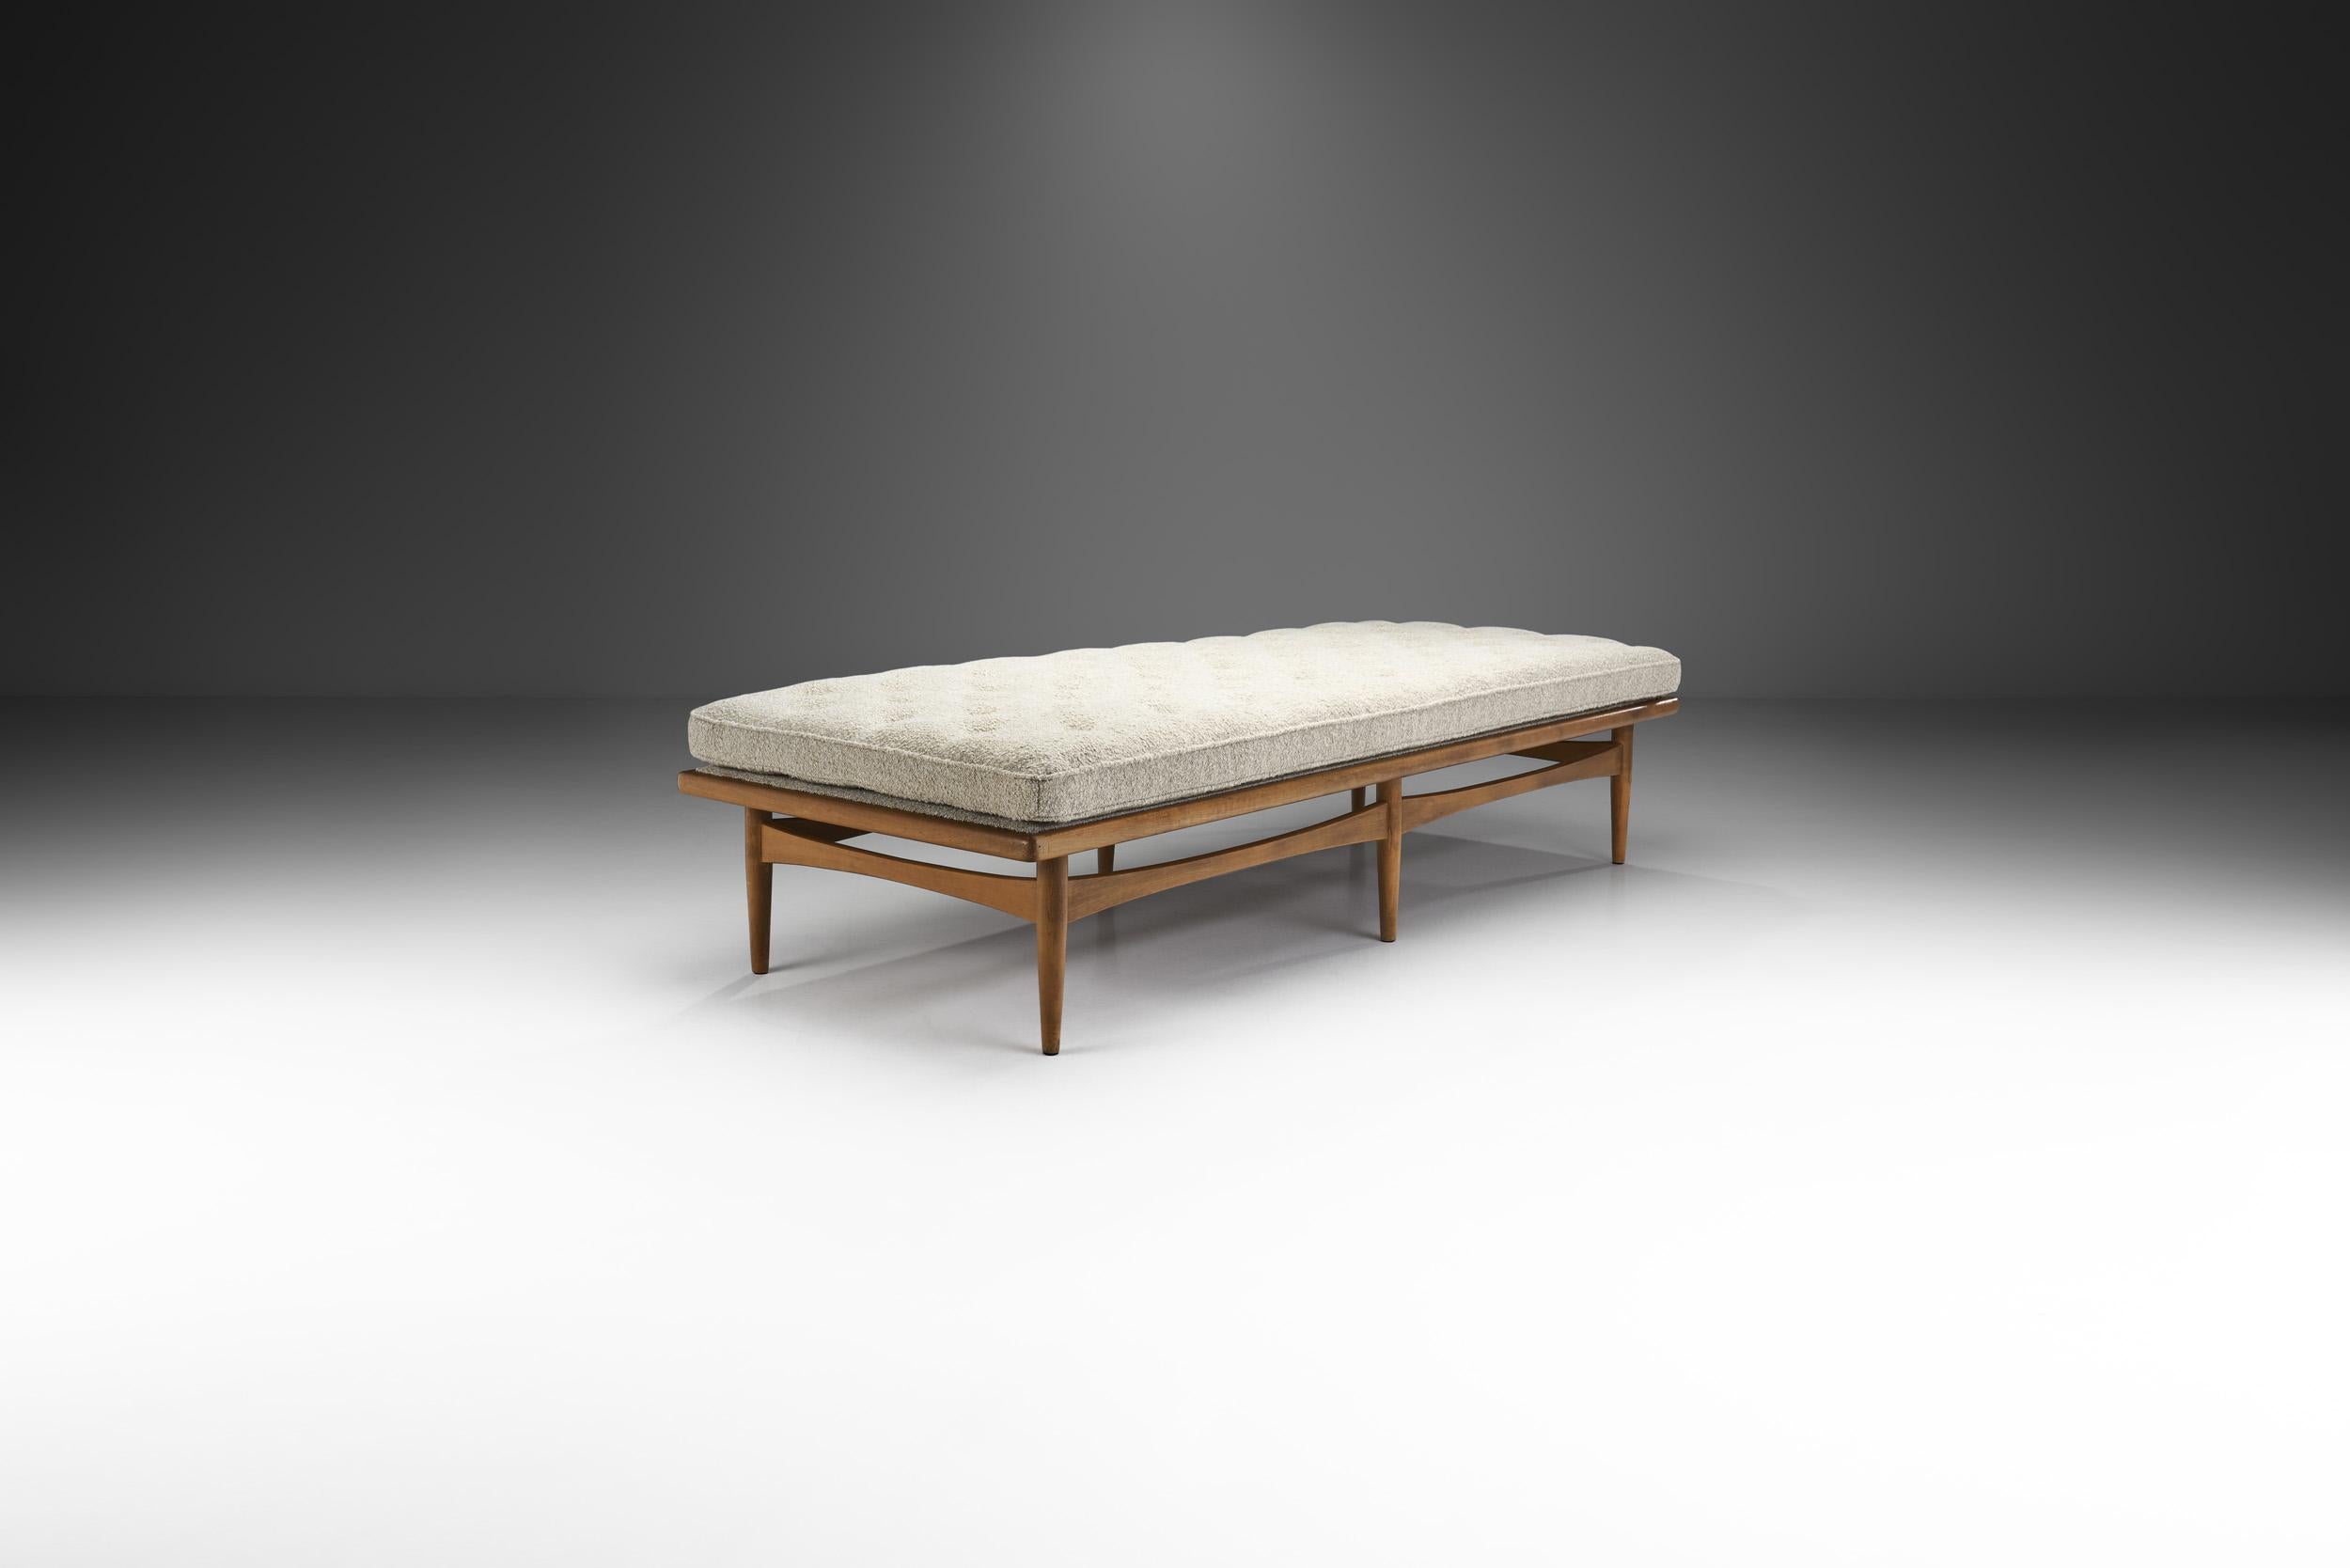 Scandinavian Modern Mid-Century Daybed with Mattress by Möbelproduktion AB, Sweden, ca 1950s